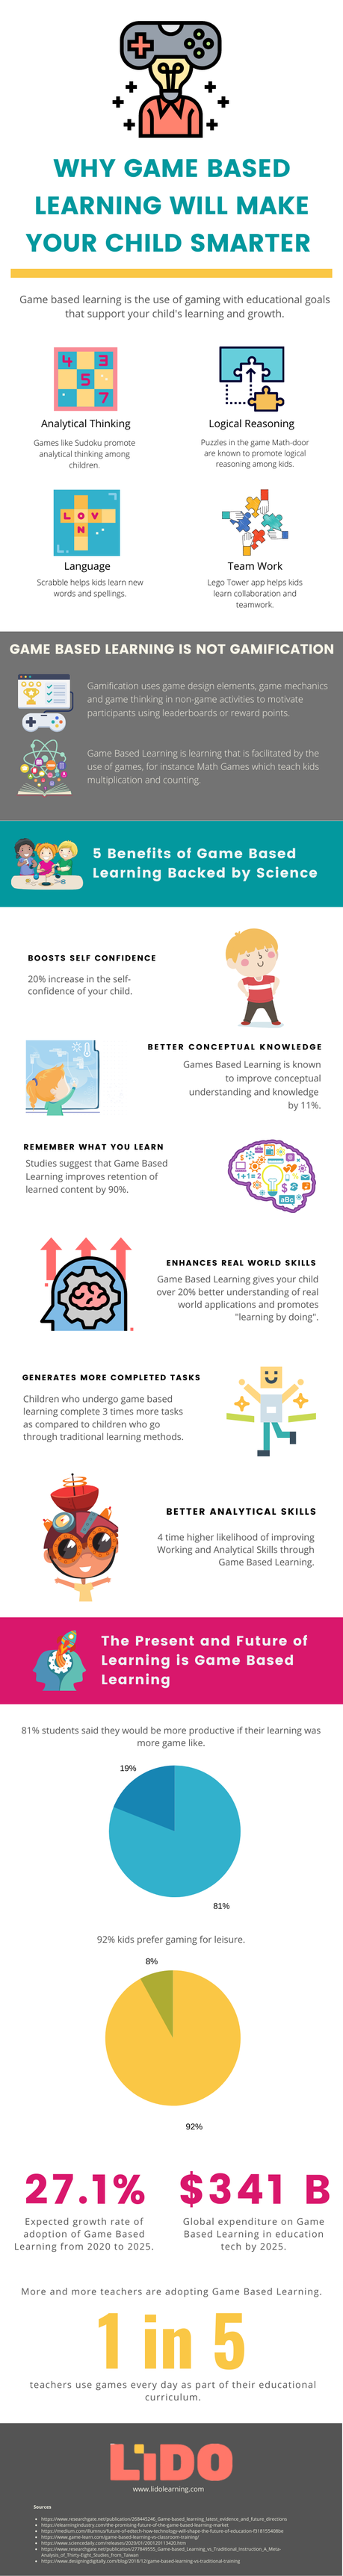 Why Game-Based Learning will make your child Smarter